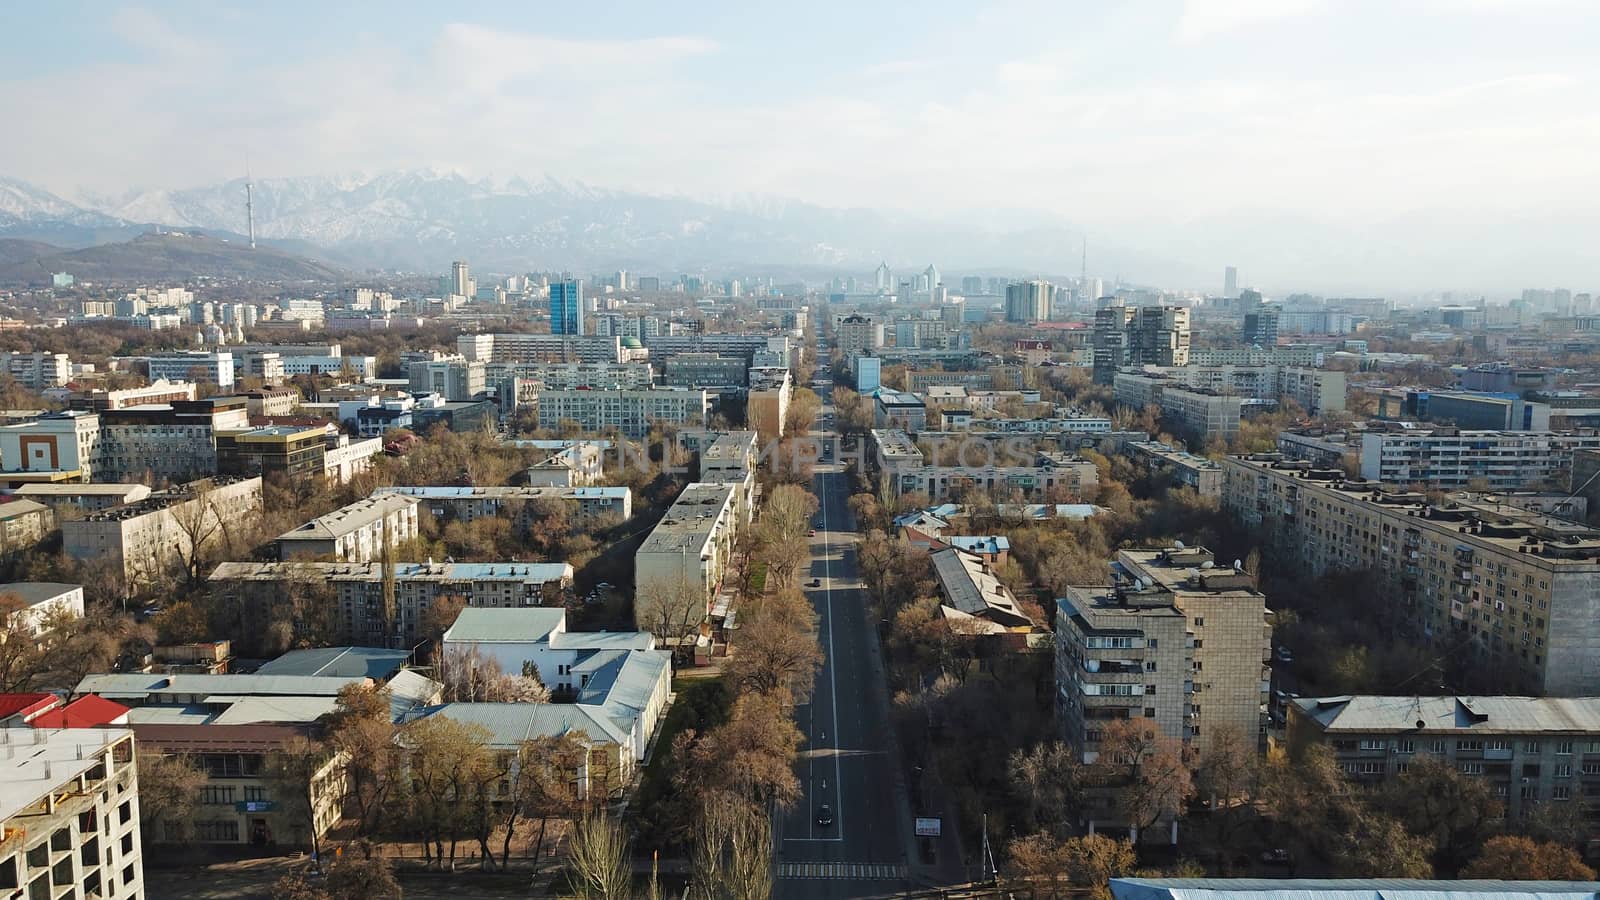 Spring city of Almaty during the quarantine period. Few people on the street, almost no cars. Transport is not running, and a strict quarantine has been imposed. Yellow trees without leaves.